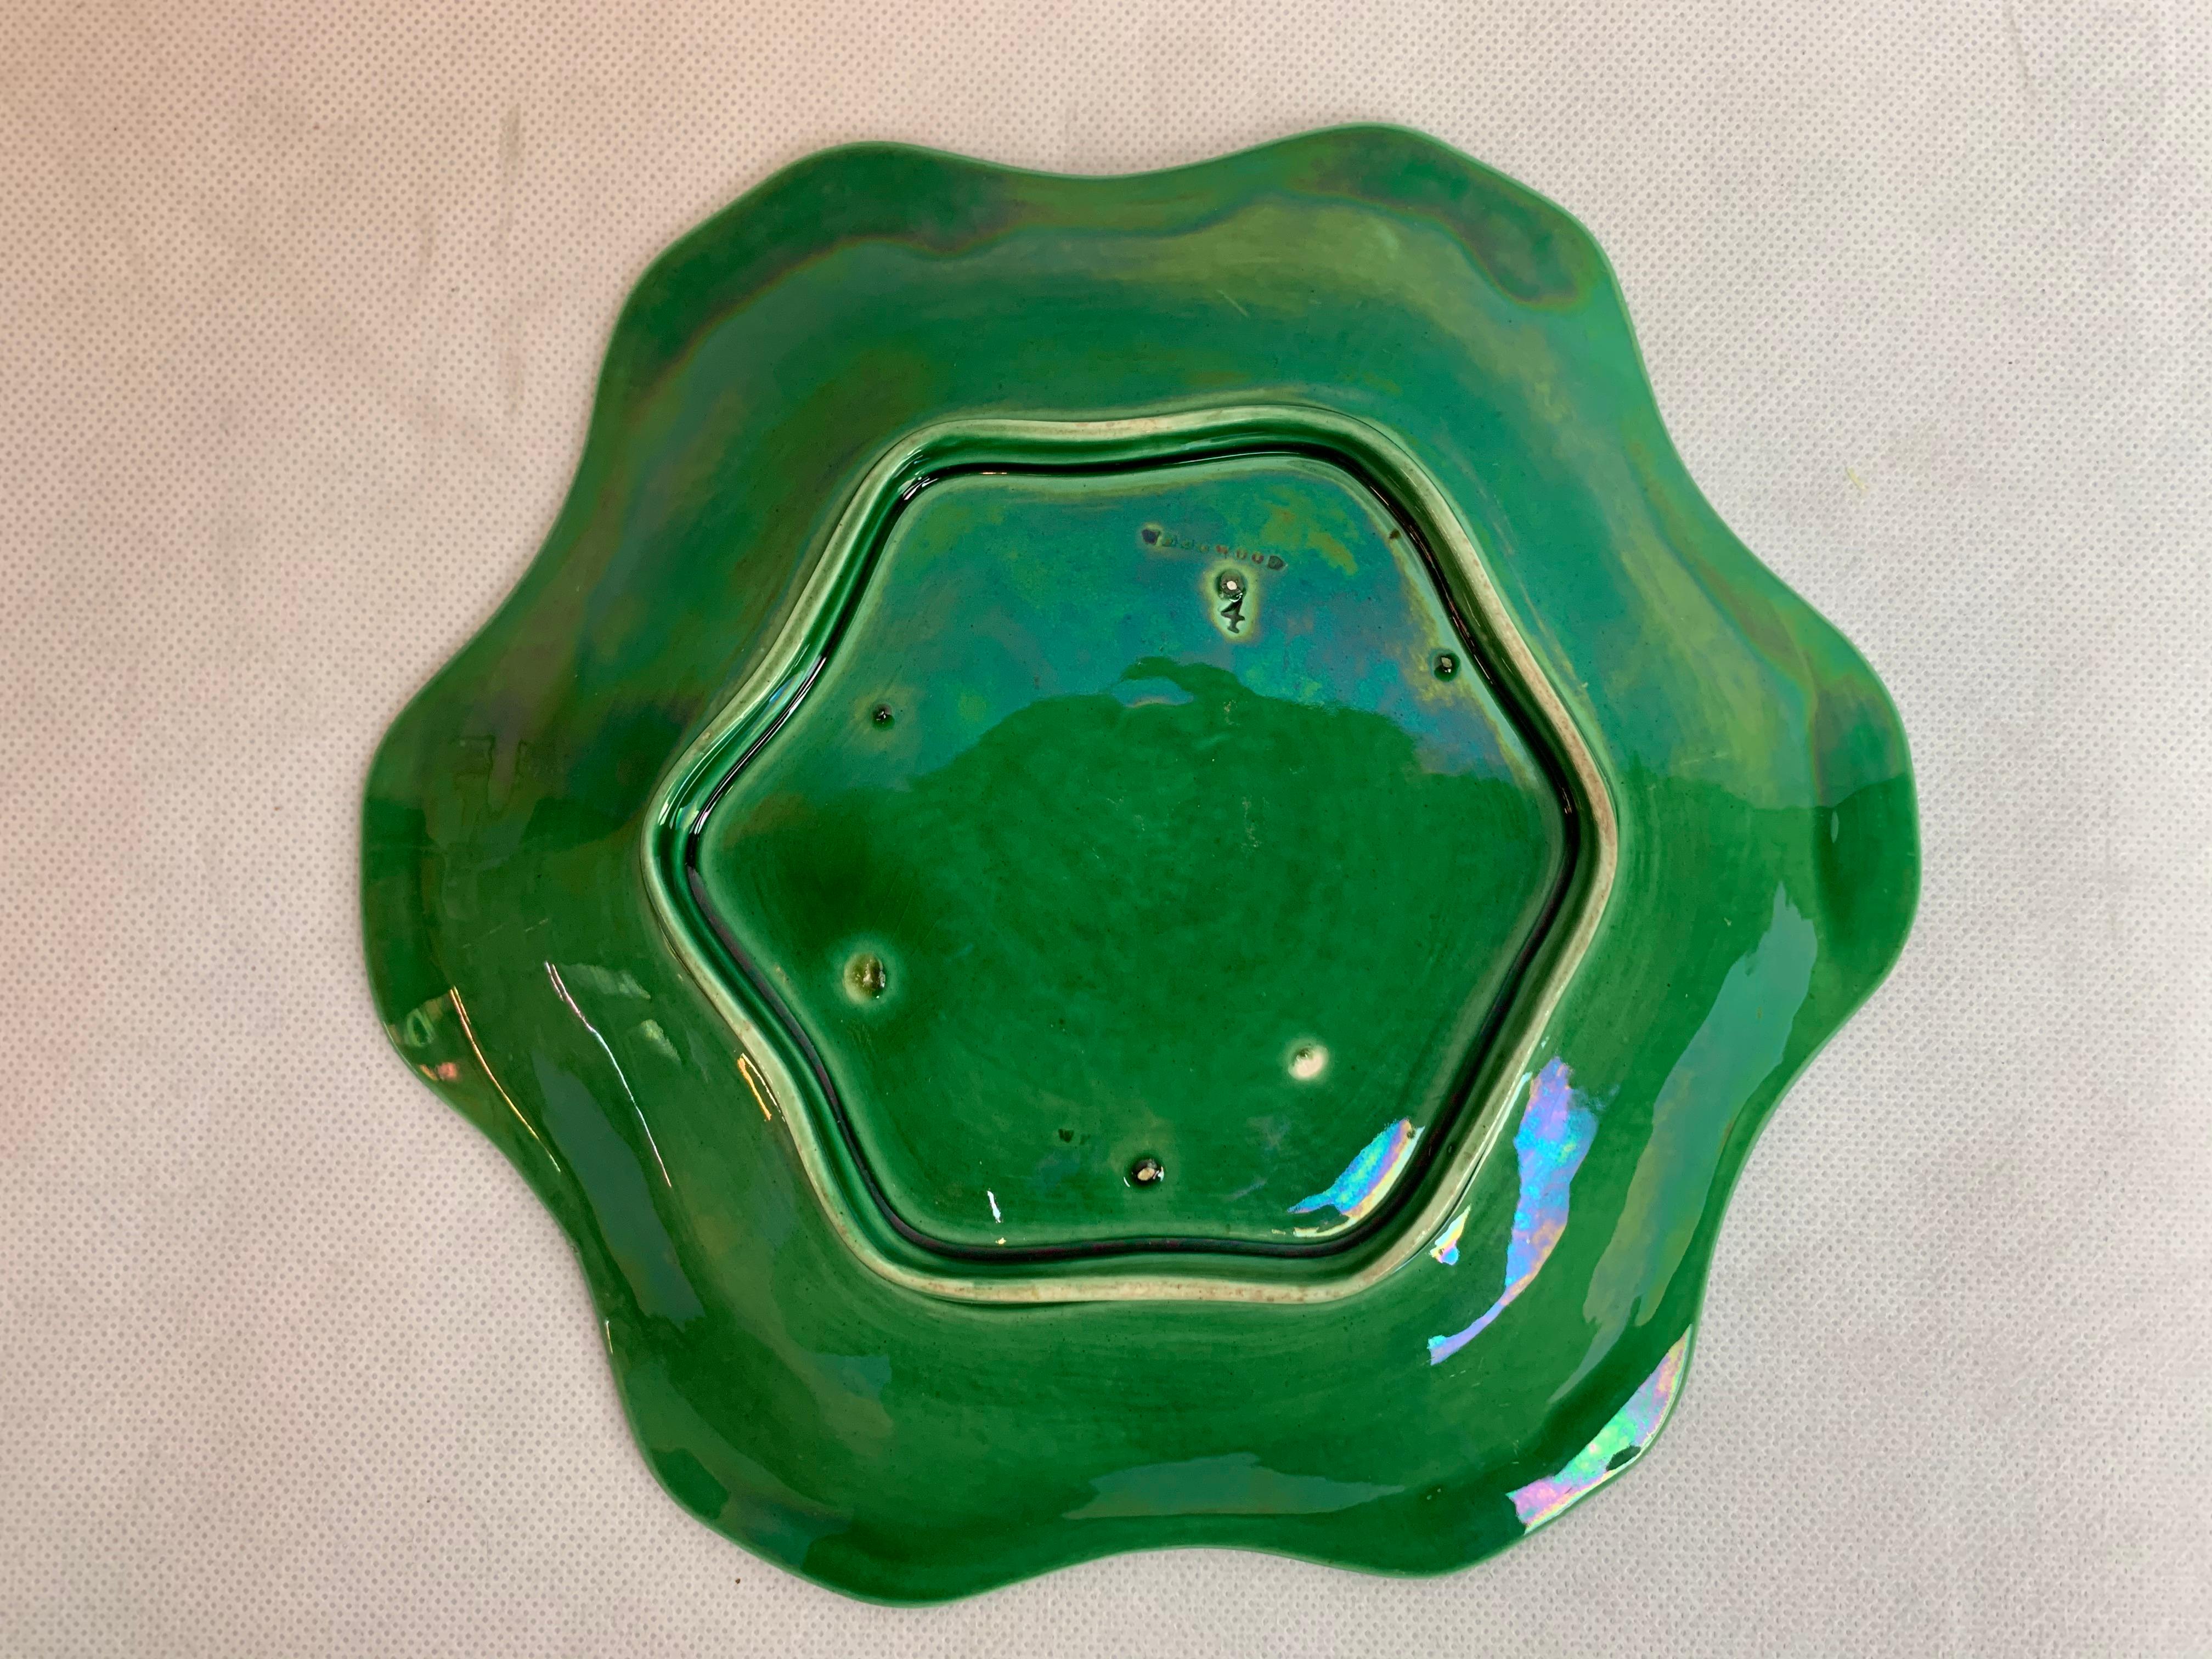 Unusual six lobbed Wedgwood green majolica plate. The design is of six green leaves on a basket weave ground. Attractive on a table or hung on a wall.  Marked Wedgwood on the reverse.

Diameter-8.5